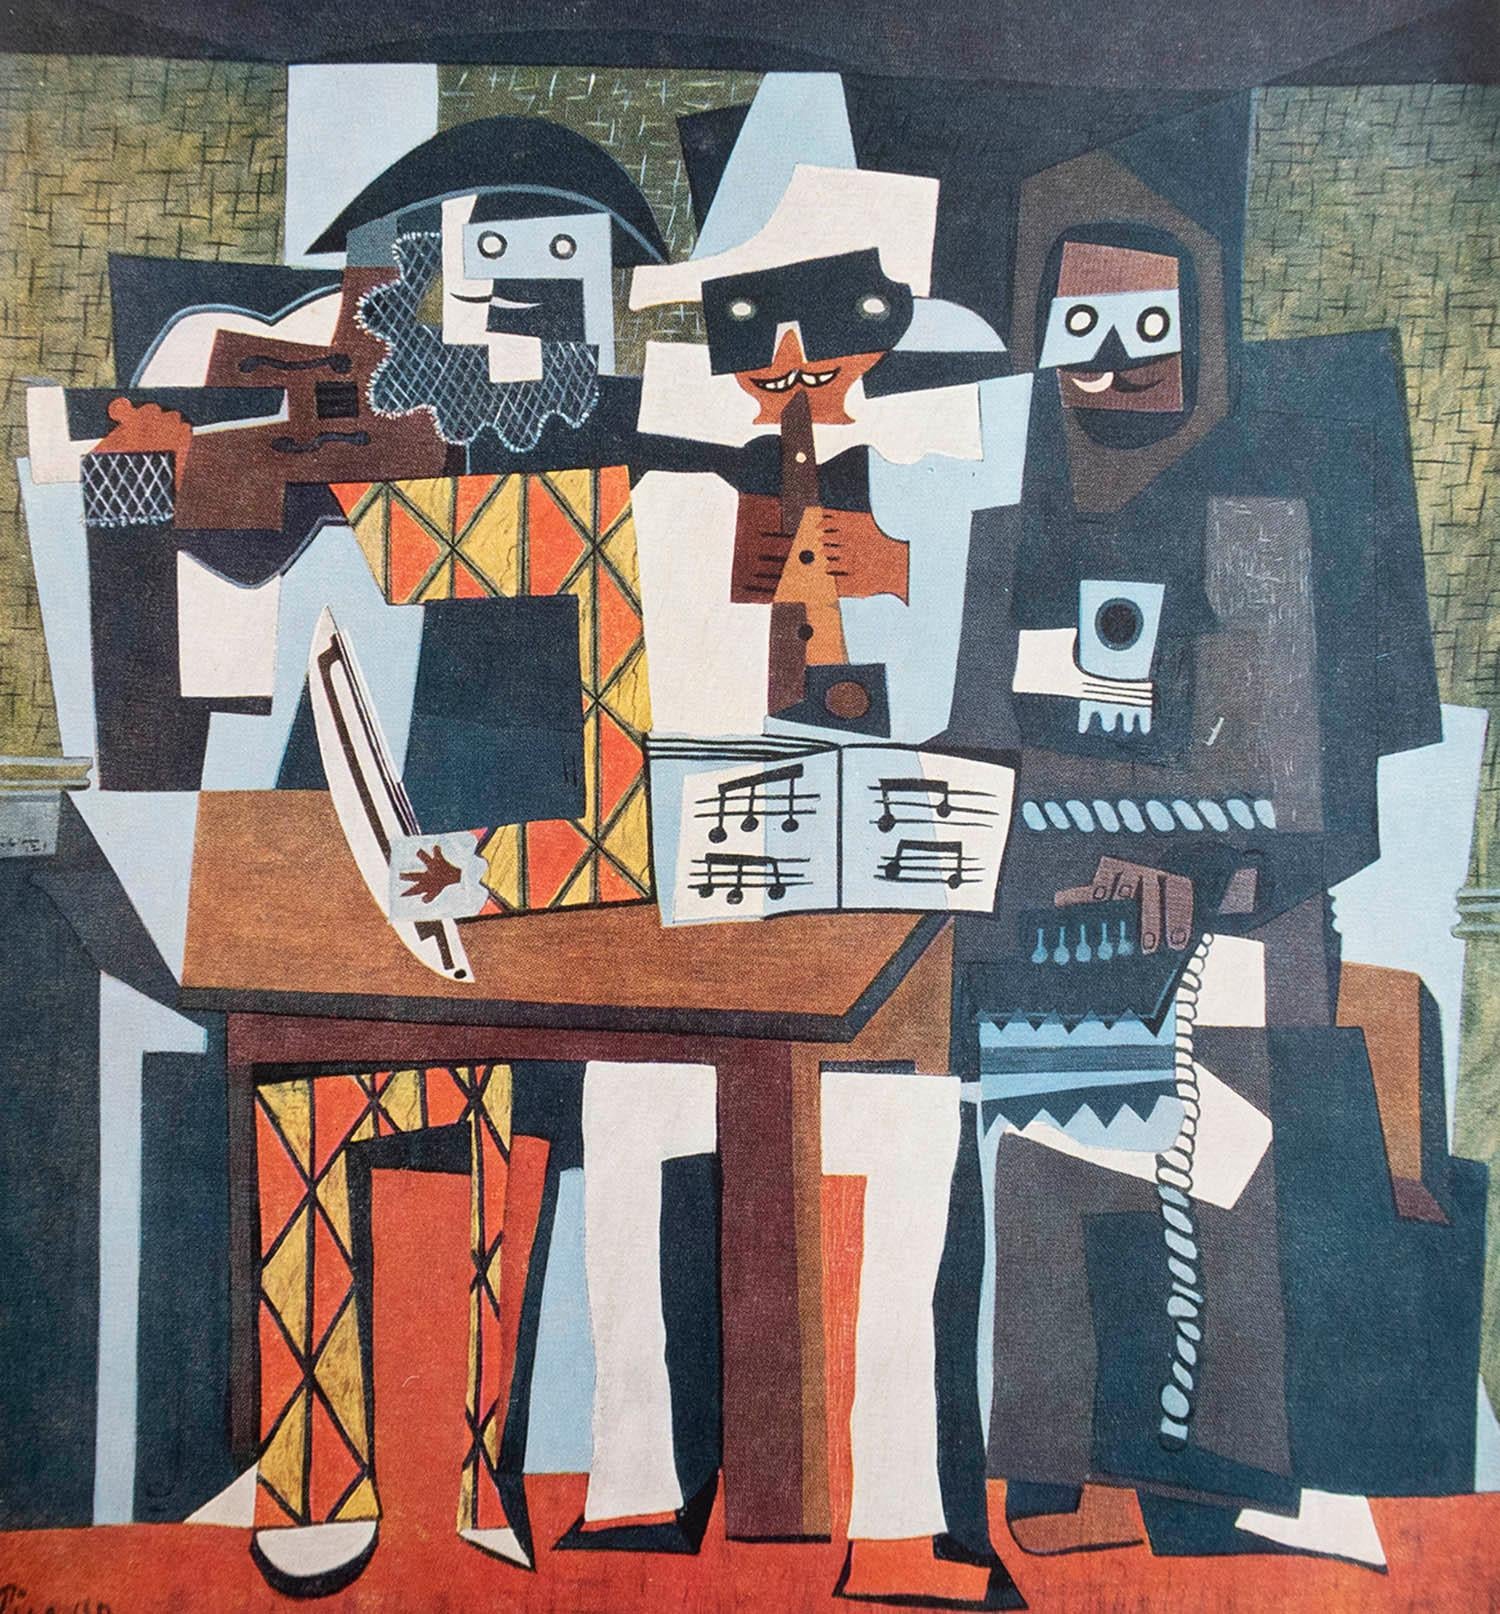  Delightful print after Picasso

Published by Beaverbrook, 1950's

Unframed

Free shipping
